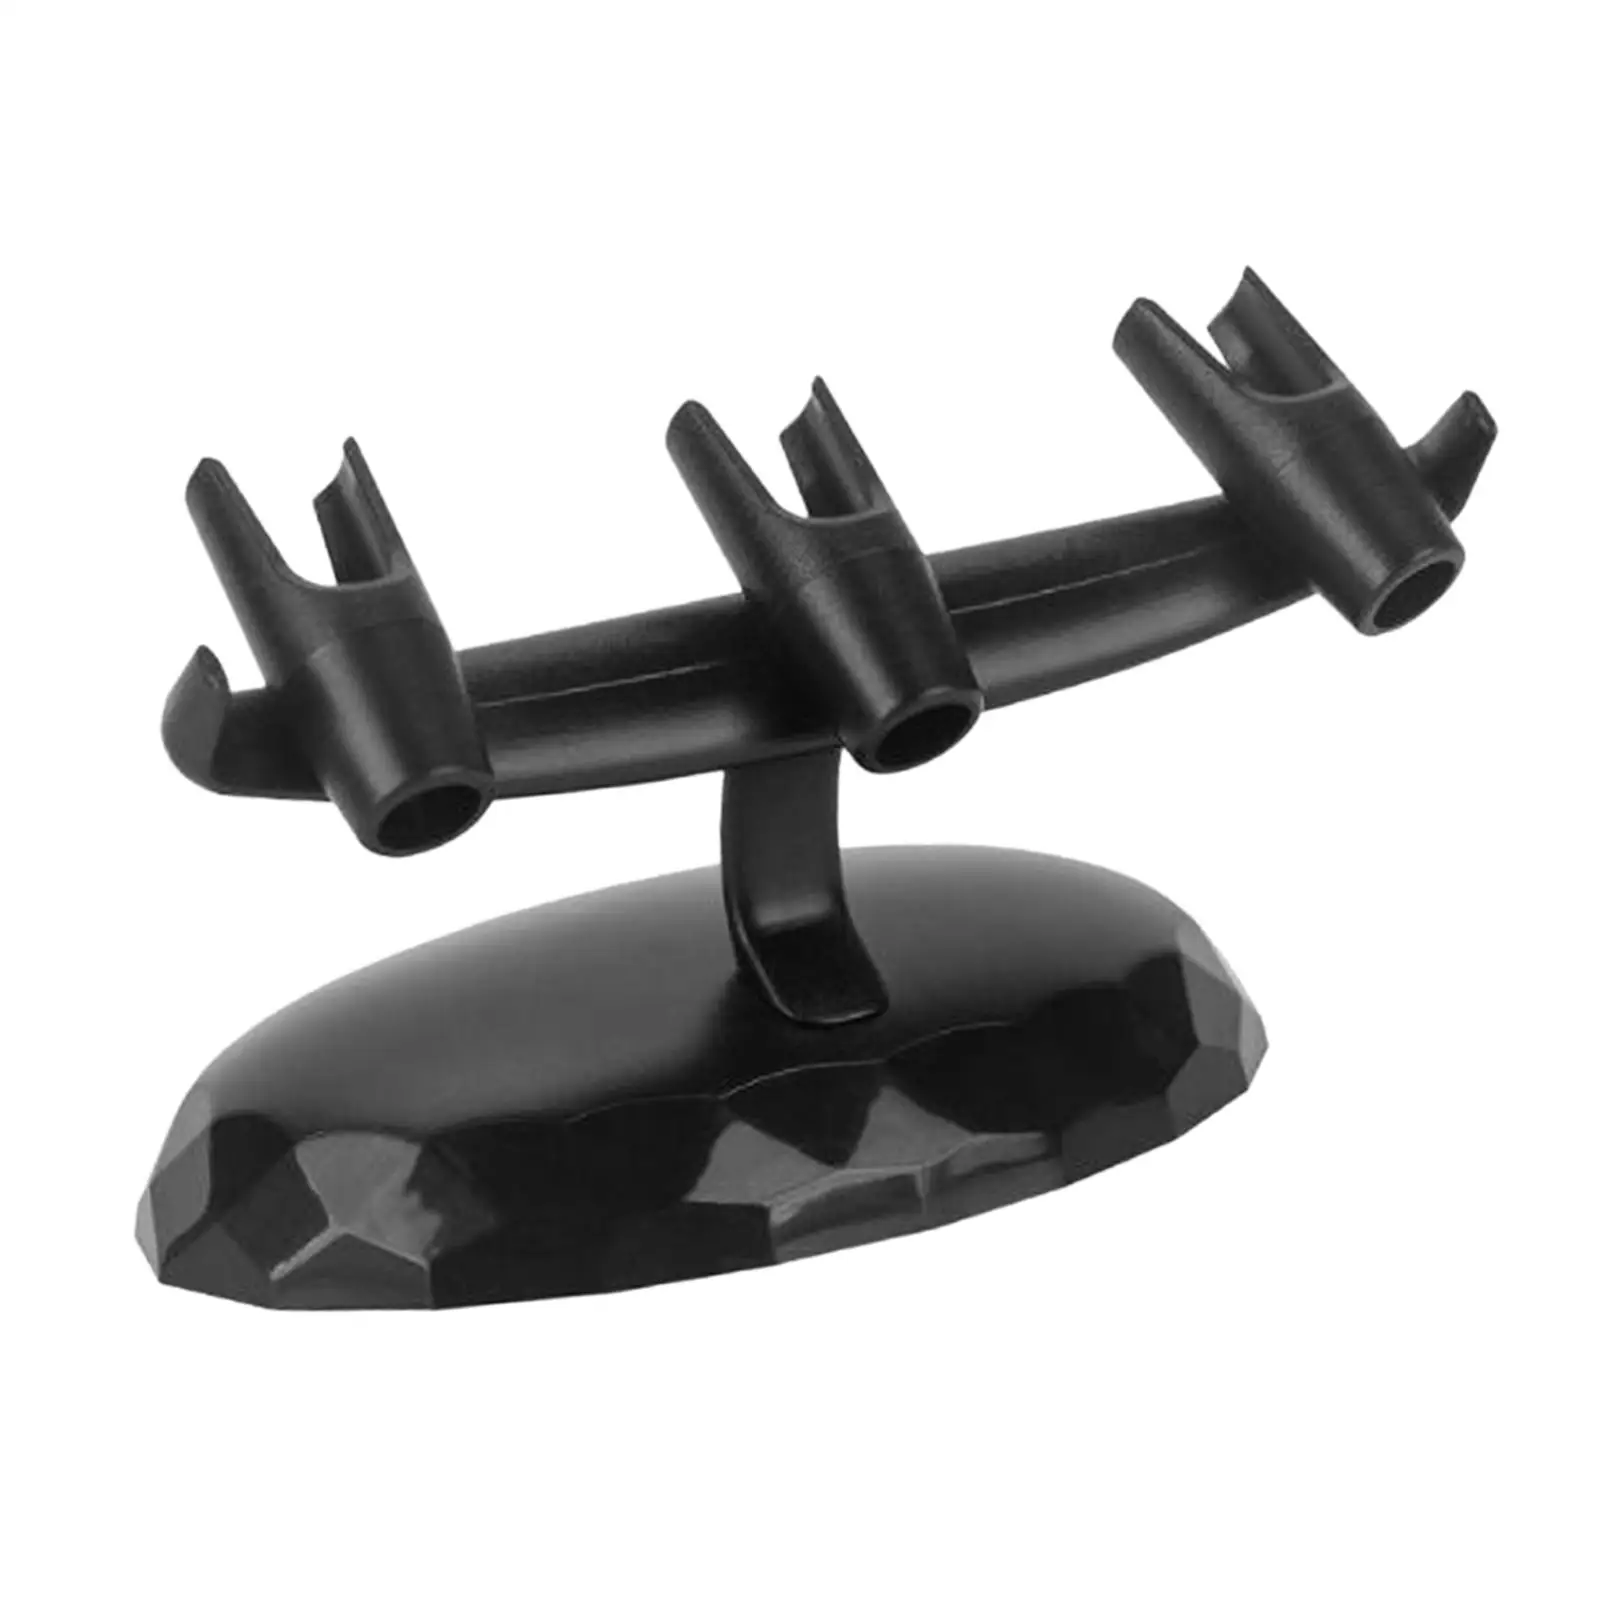 Desktop Airbrush Stand Can Accommodate 3 Universal Airbrush Airbrush Holder for Nail Art Car Painting Makeup Painting